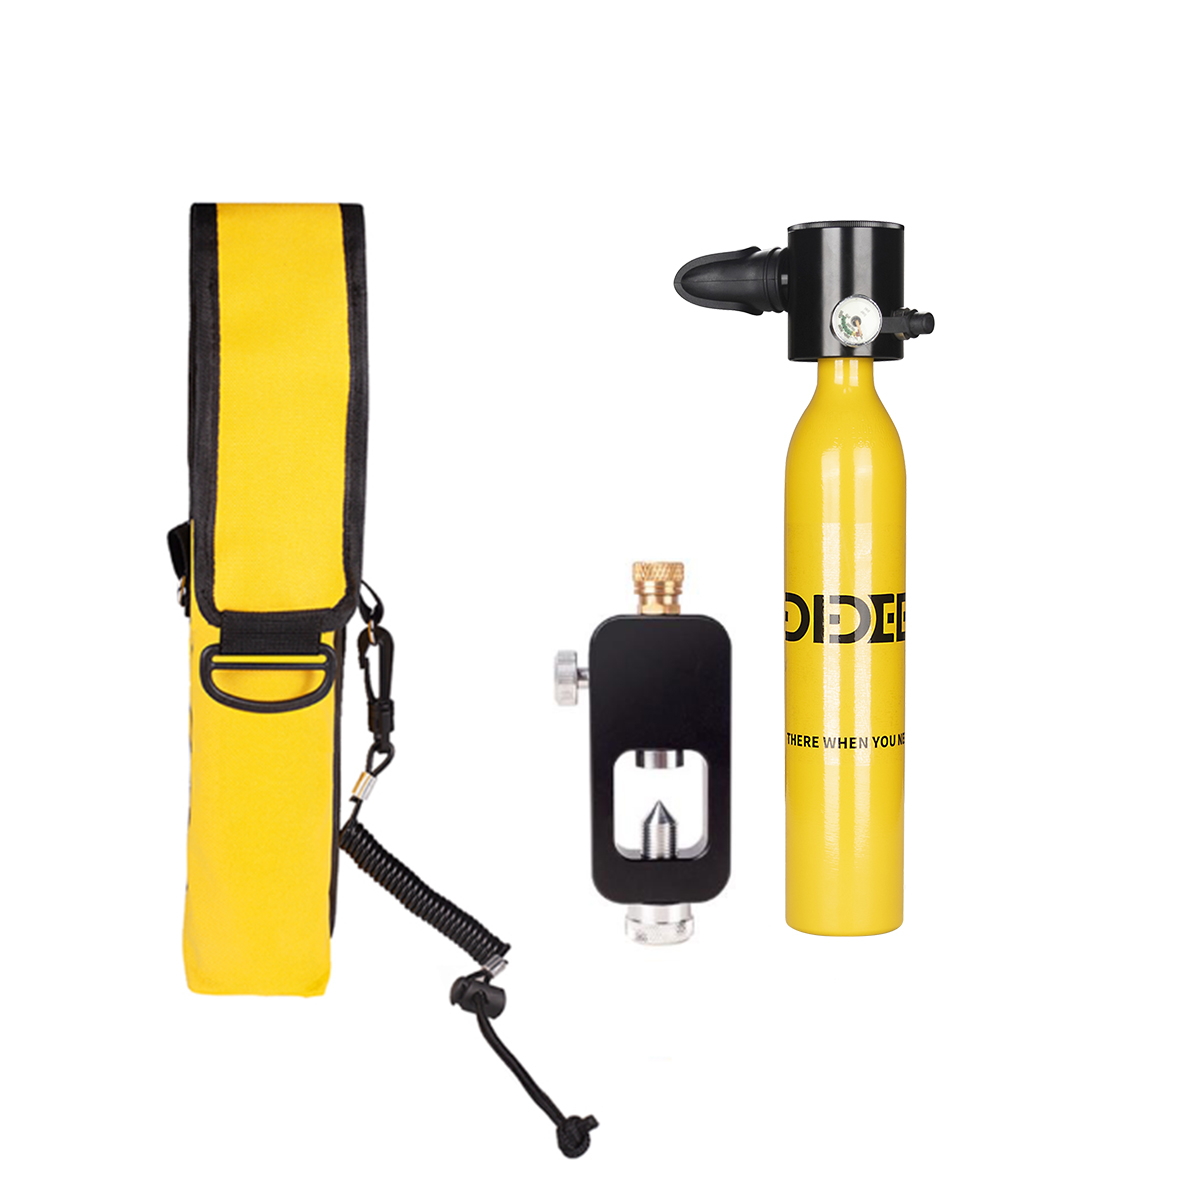 

Diving Set Equipment 0.5L Mini Scuba Oxygen Cylinder Underwater Diving Accessory Tool Air Oxygen Tank W/ Adapter & Storage Bag